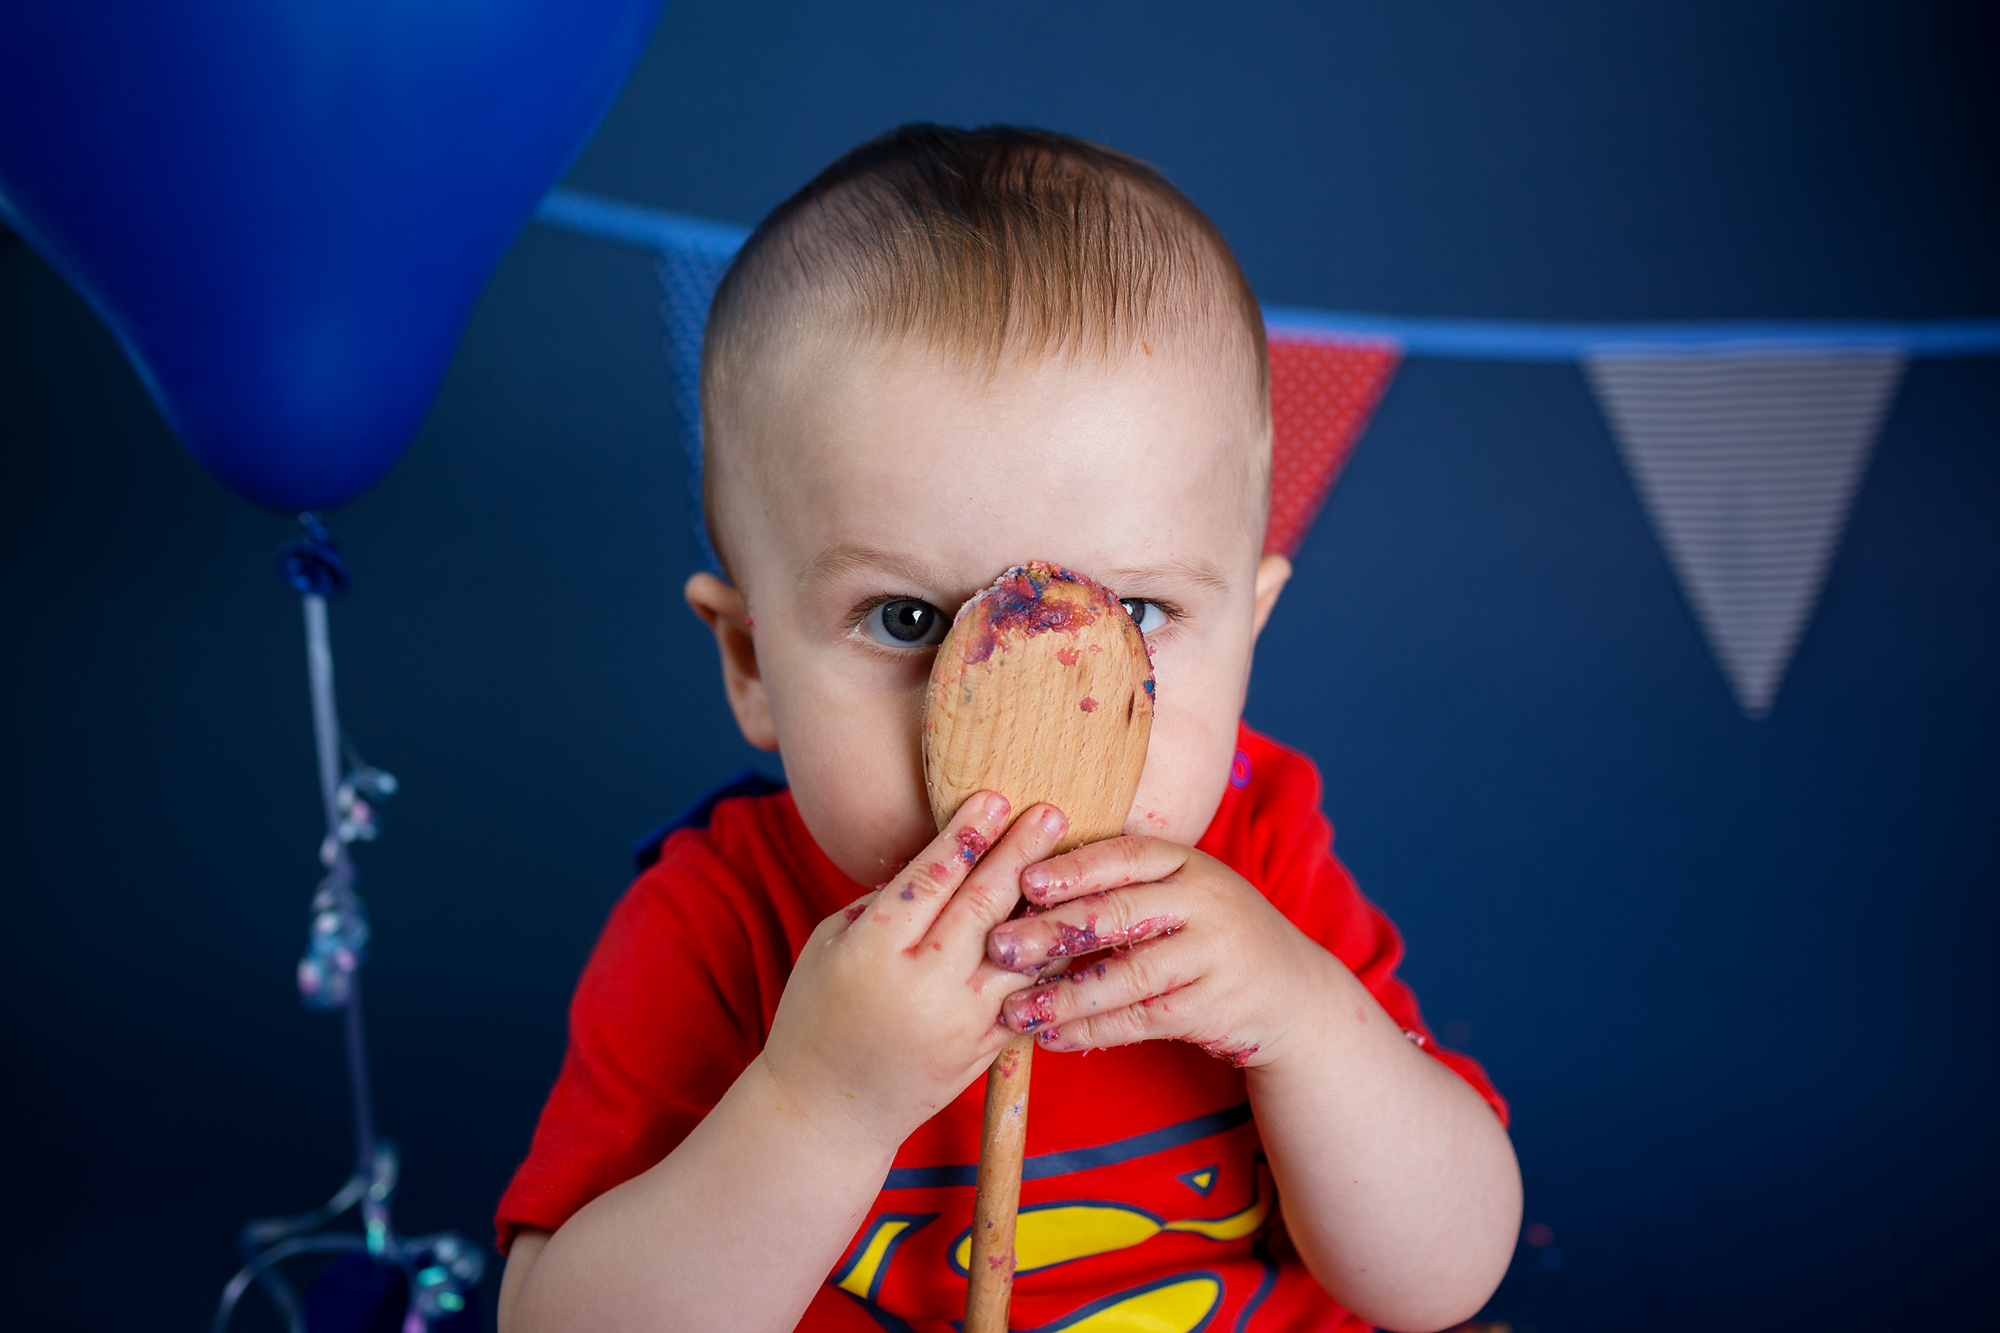 Cake Smash and first birthday photographer, Caerphilly near Cardiff, South Wales